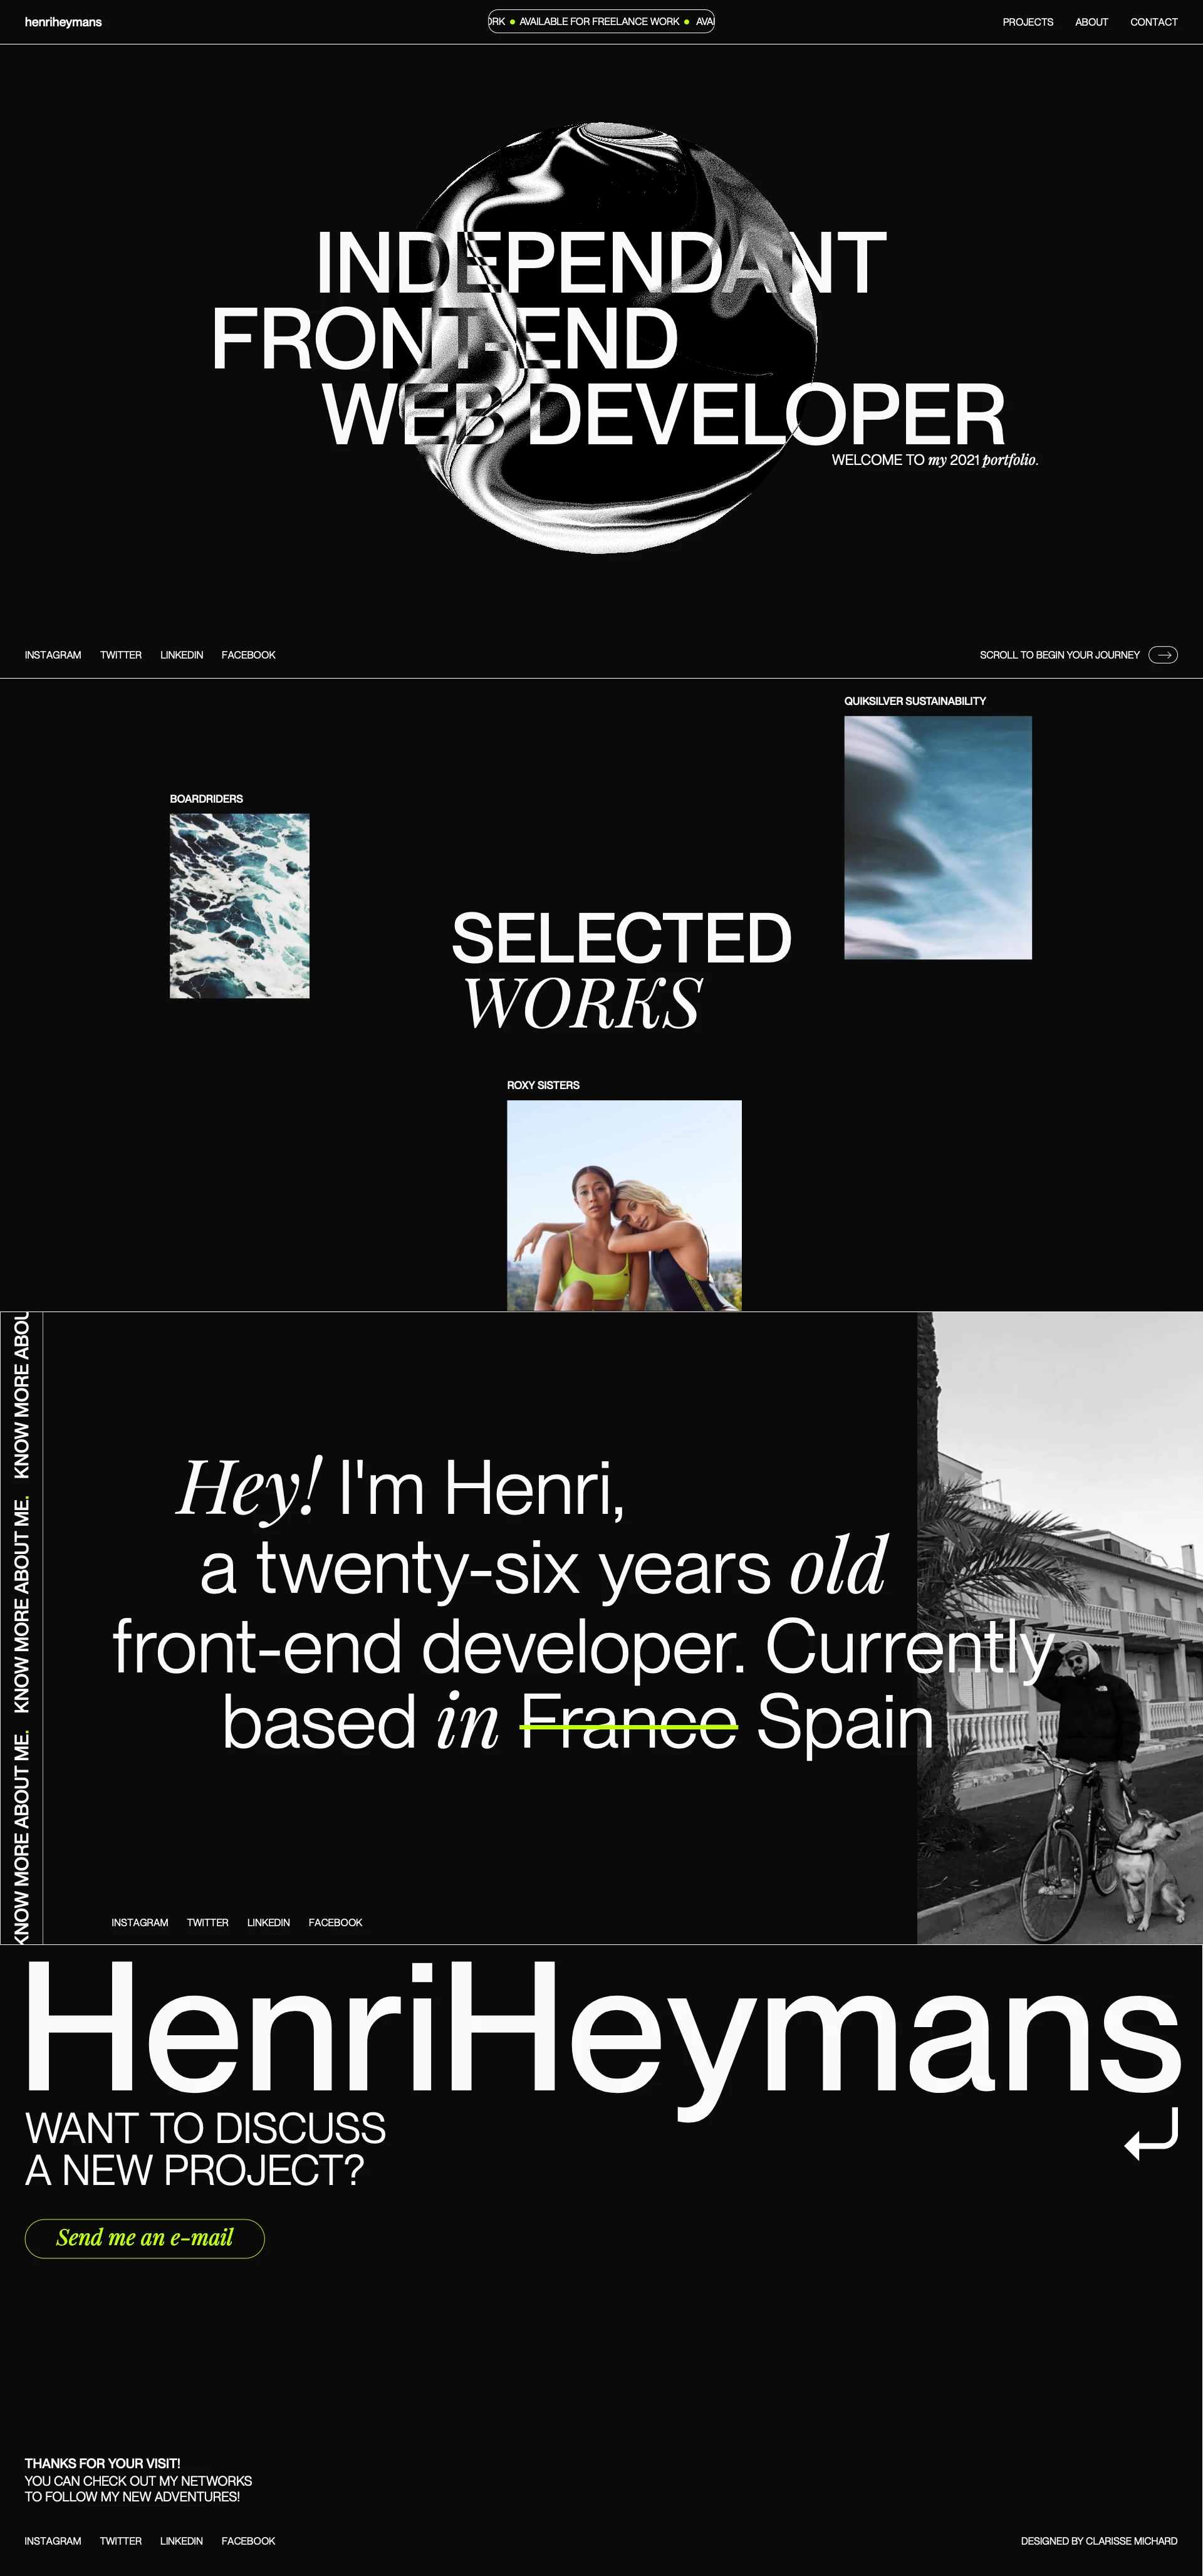 Henri Heymans Landing Page Example: Hey, I'm Henri Heymans, 26 years old front-end developer, after working 3 years at Boardriders, I'm now freelance and ready to work on your next project! I've always wanted to create new things, unique experiences, getting into web development changed a lot of things for me, and since then, I try to push my work to new horizons with each project, always putting quality first.